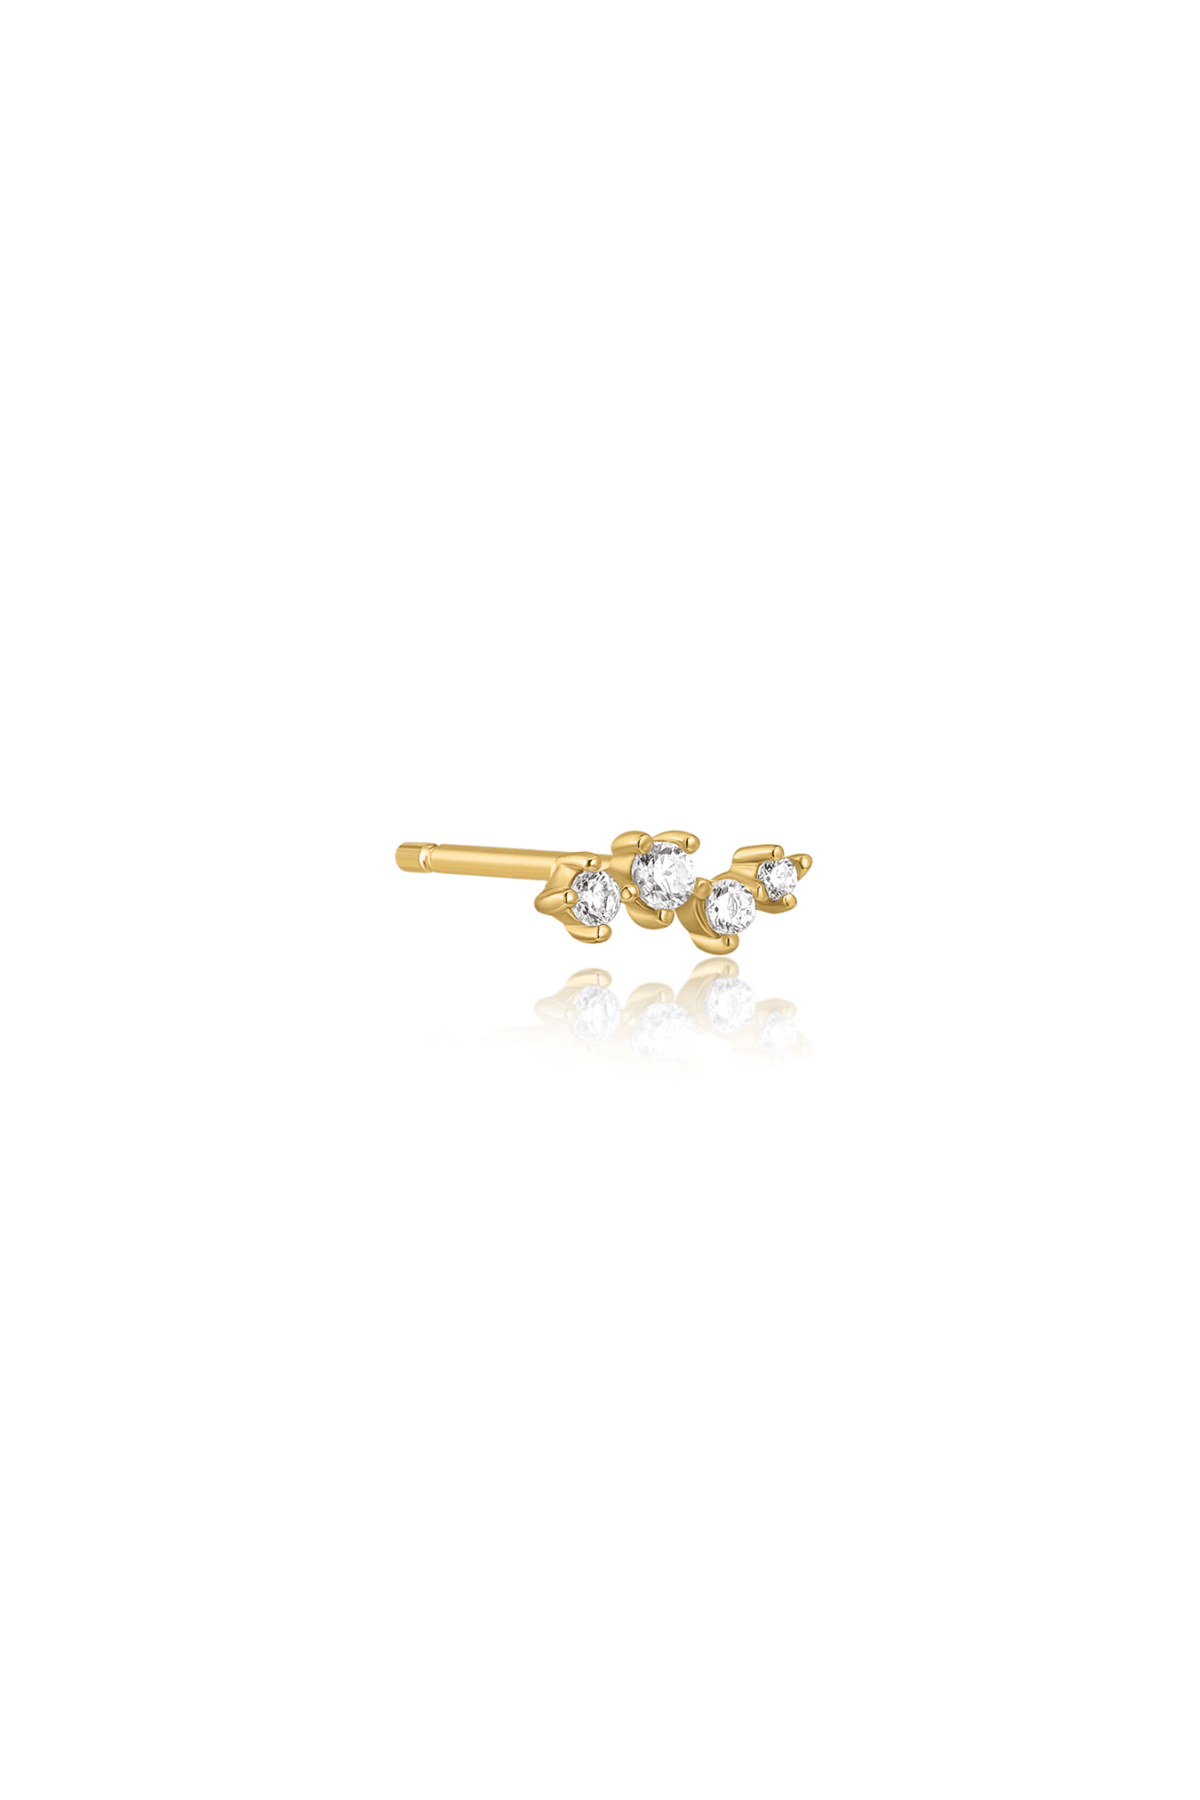 The Whimsy Topaz 14ct Gold Vermeil Stud Earring (Single) - Molten Store